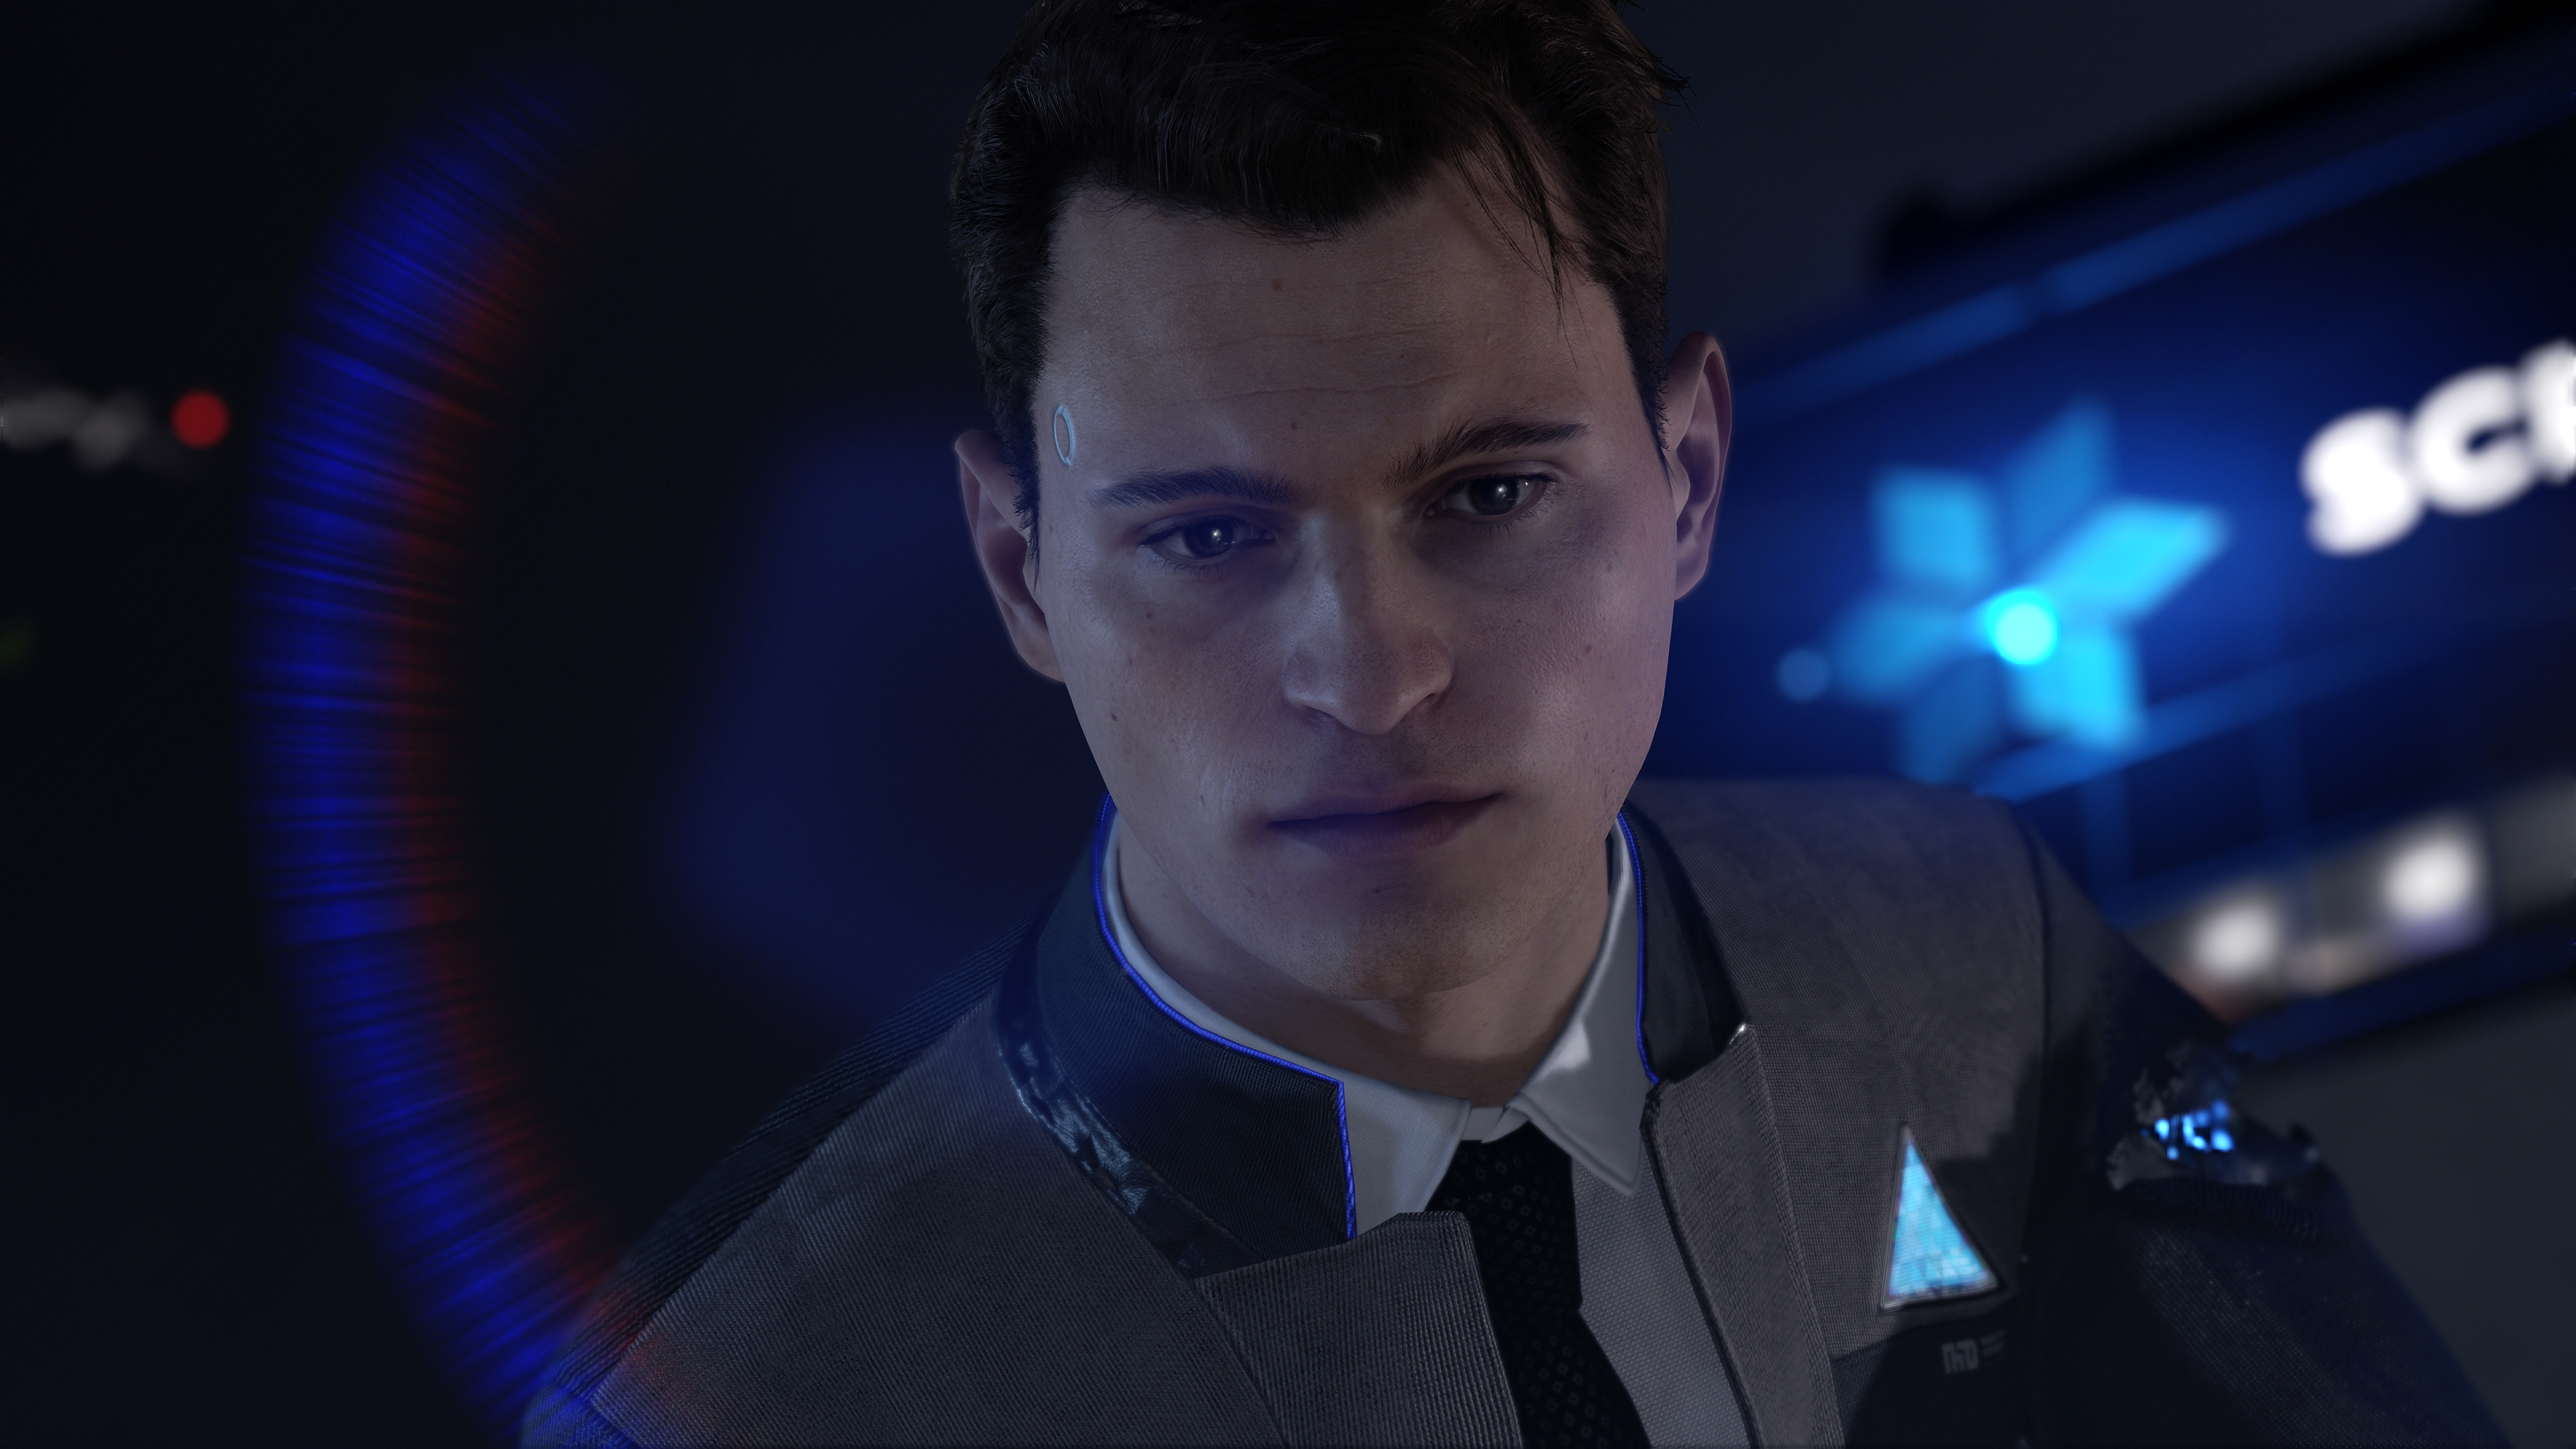 Detroit: Become Human' Has Gone Gold, Demo Available Now